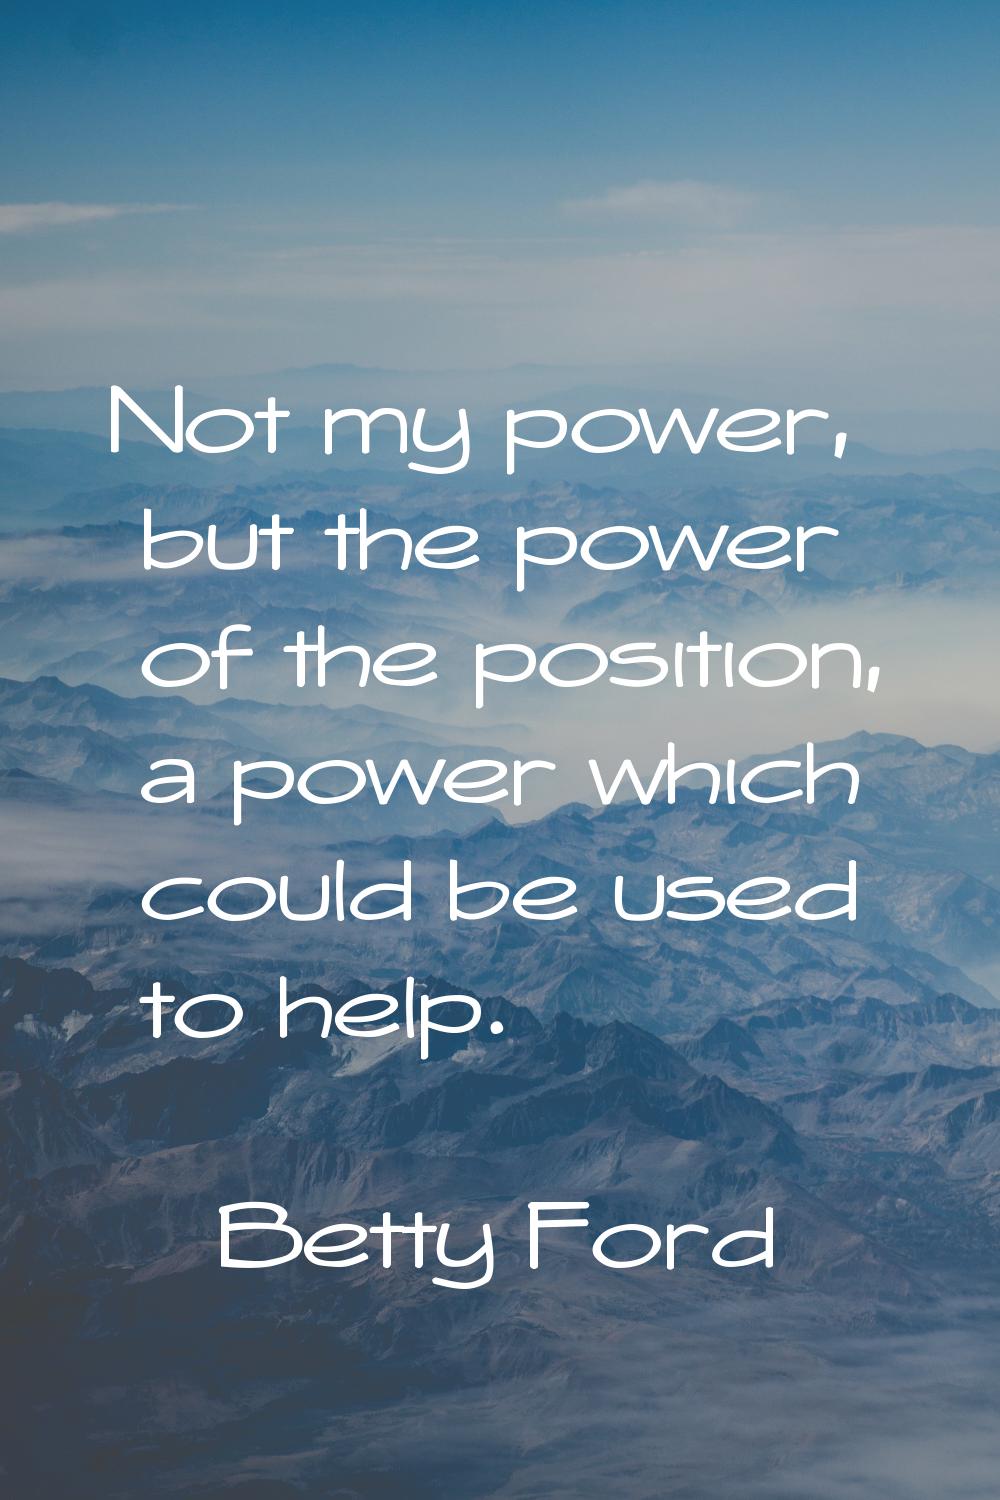 Not my power, but the power of the position, a power which could be used to help.